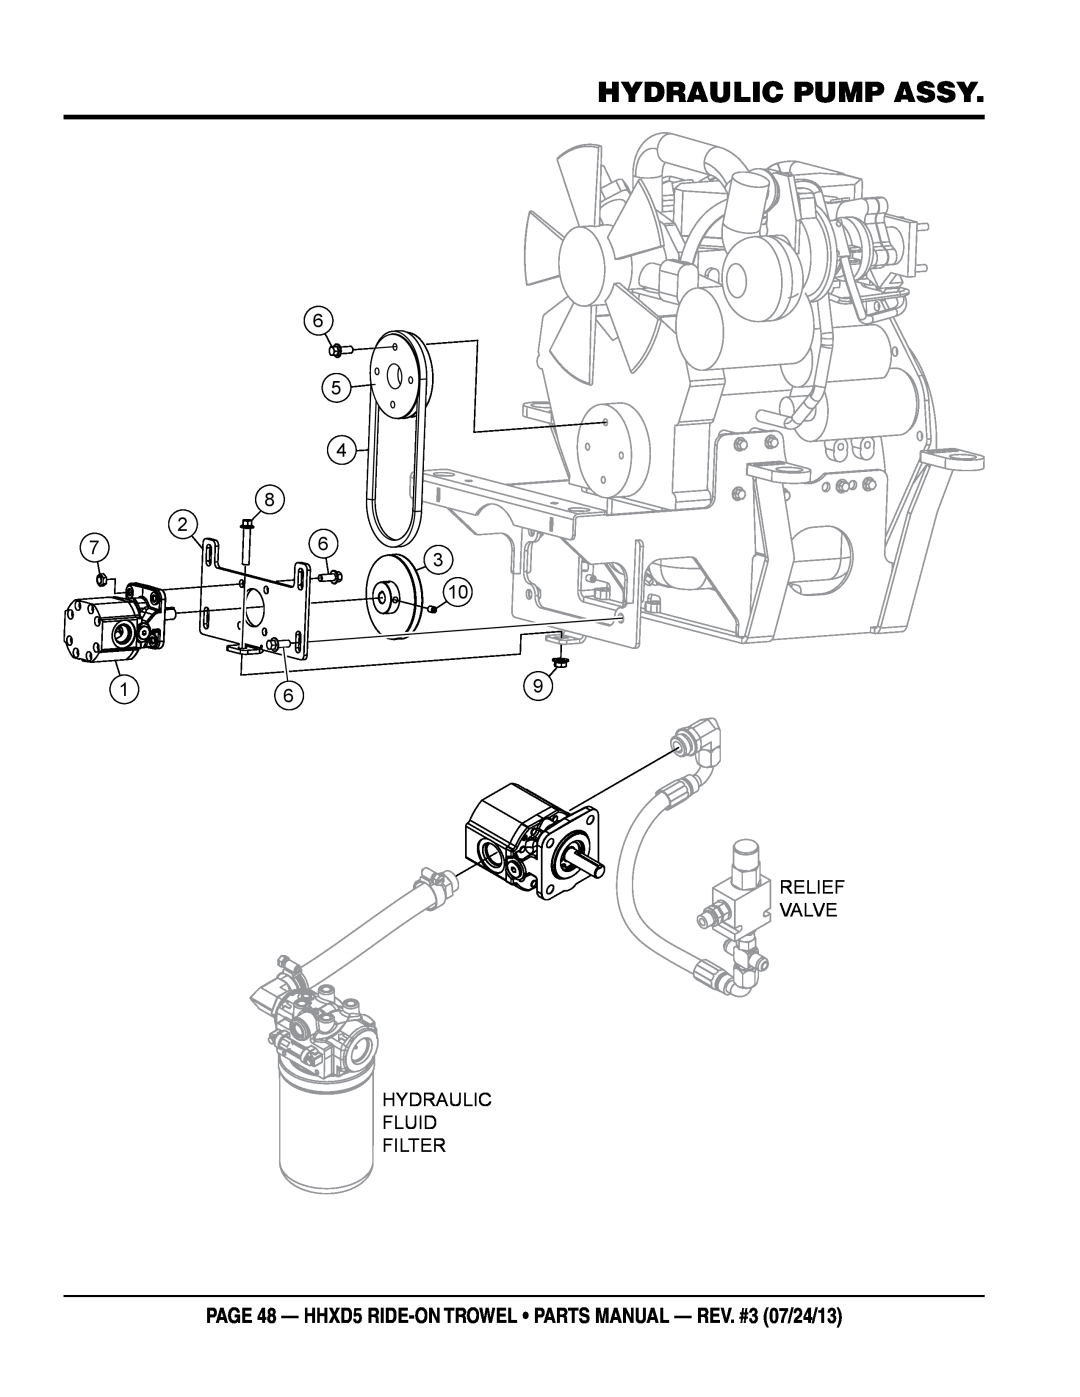 Multiquip HHSD5 hydraulic pump assy, page 48 - HHXD5 RIDE-ON TROWEL parts manual - rev. #3 07/24/13 